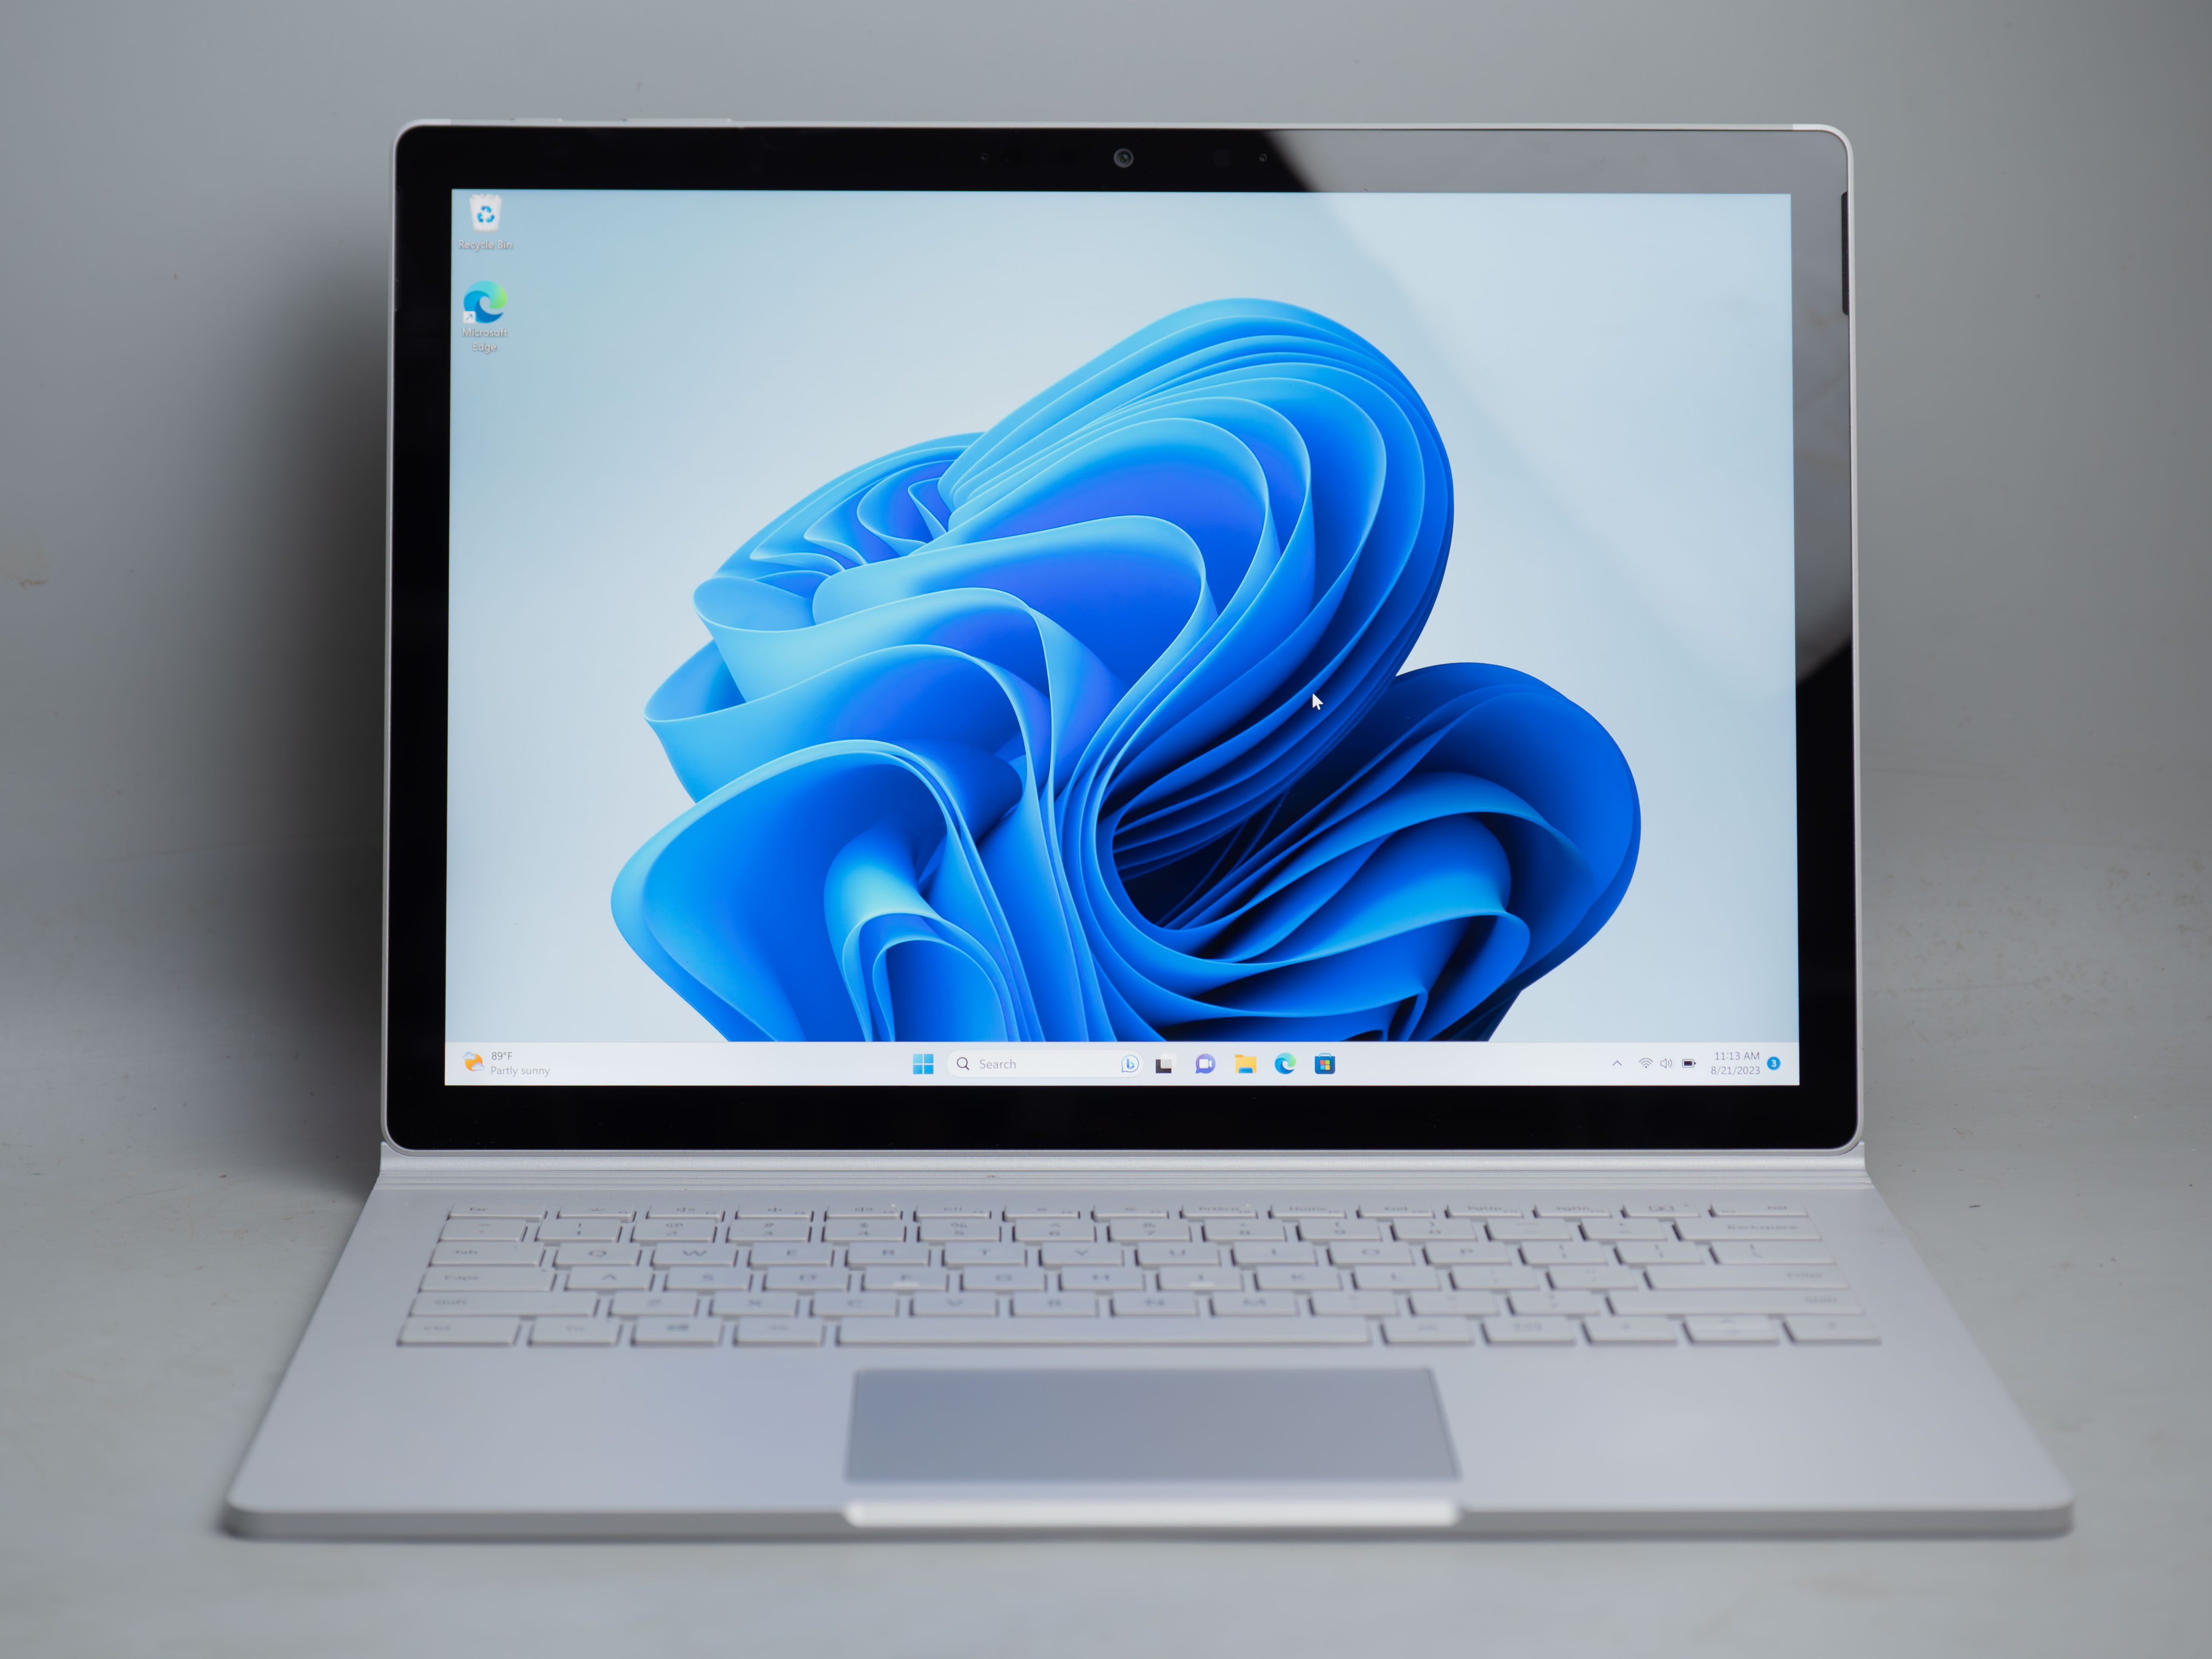 surface-book-3-ssd-256gb-core-i5-1035g7-ram-8gb-13-5-inches-19660